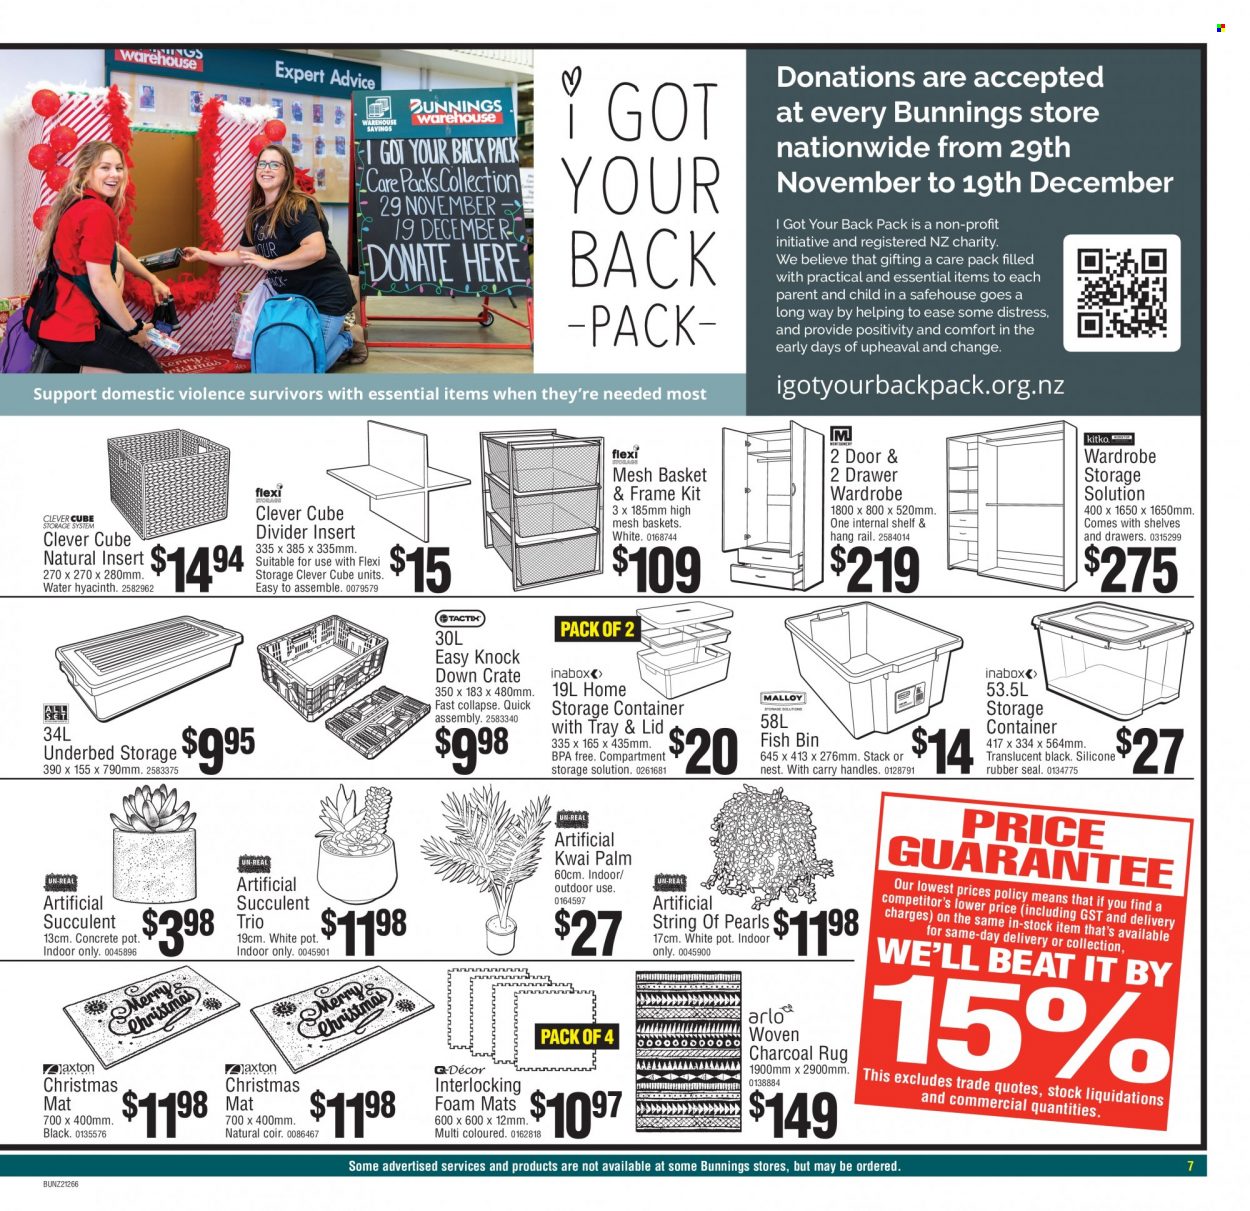 Bunnings Warehouse mailer  - 29.12.2021 - 29.12.2021. Page 7.